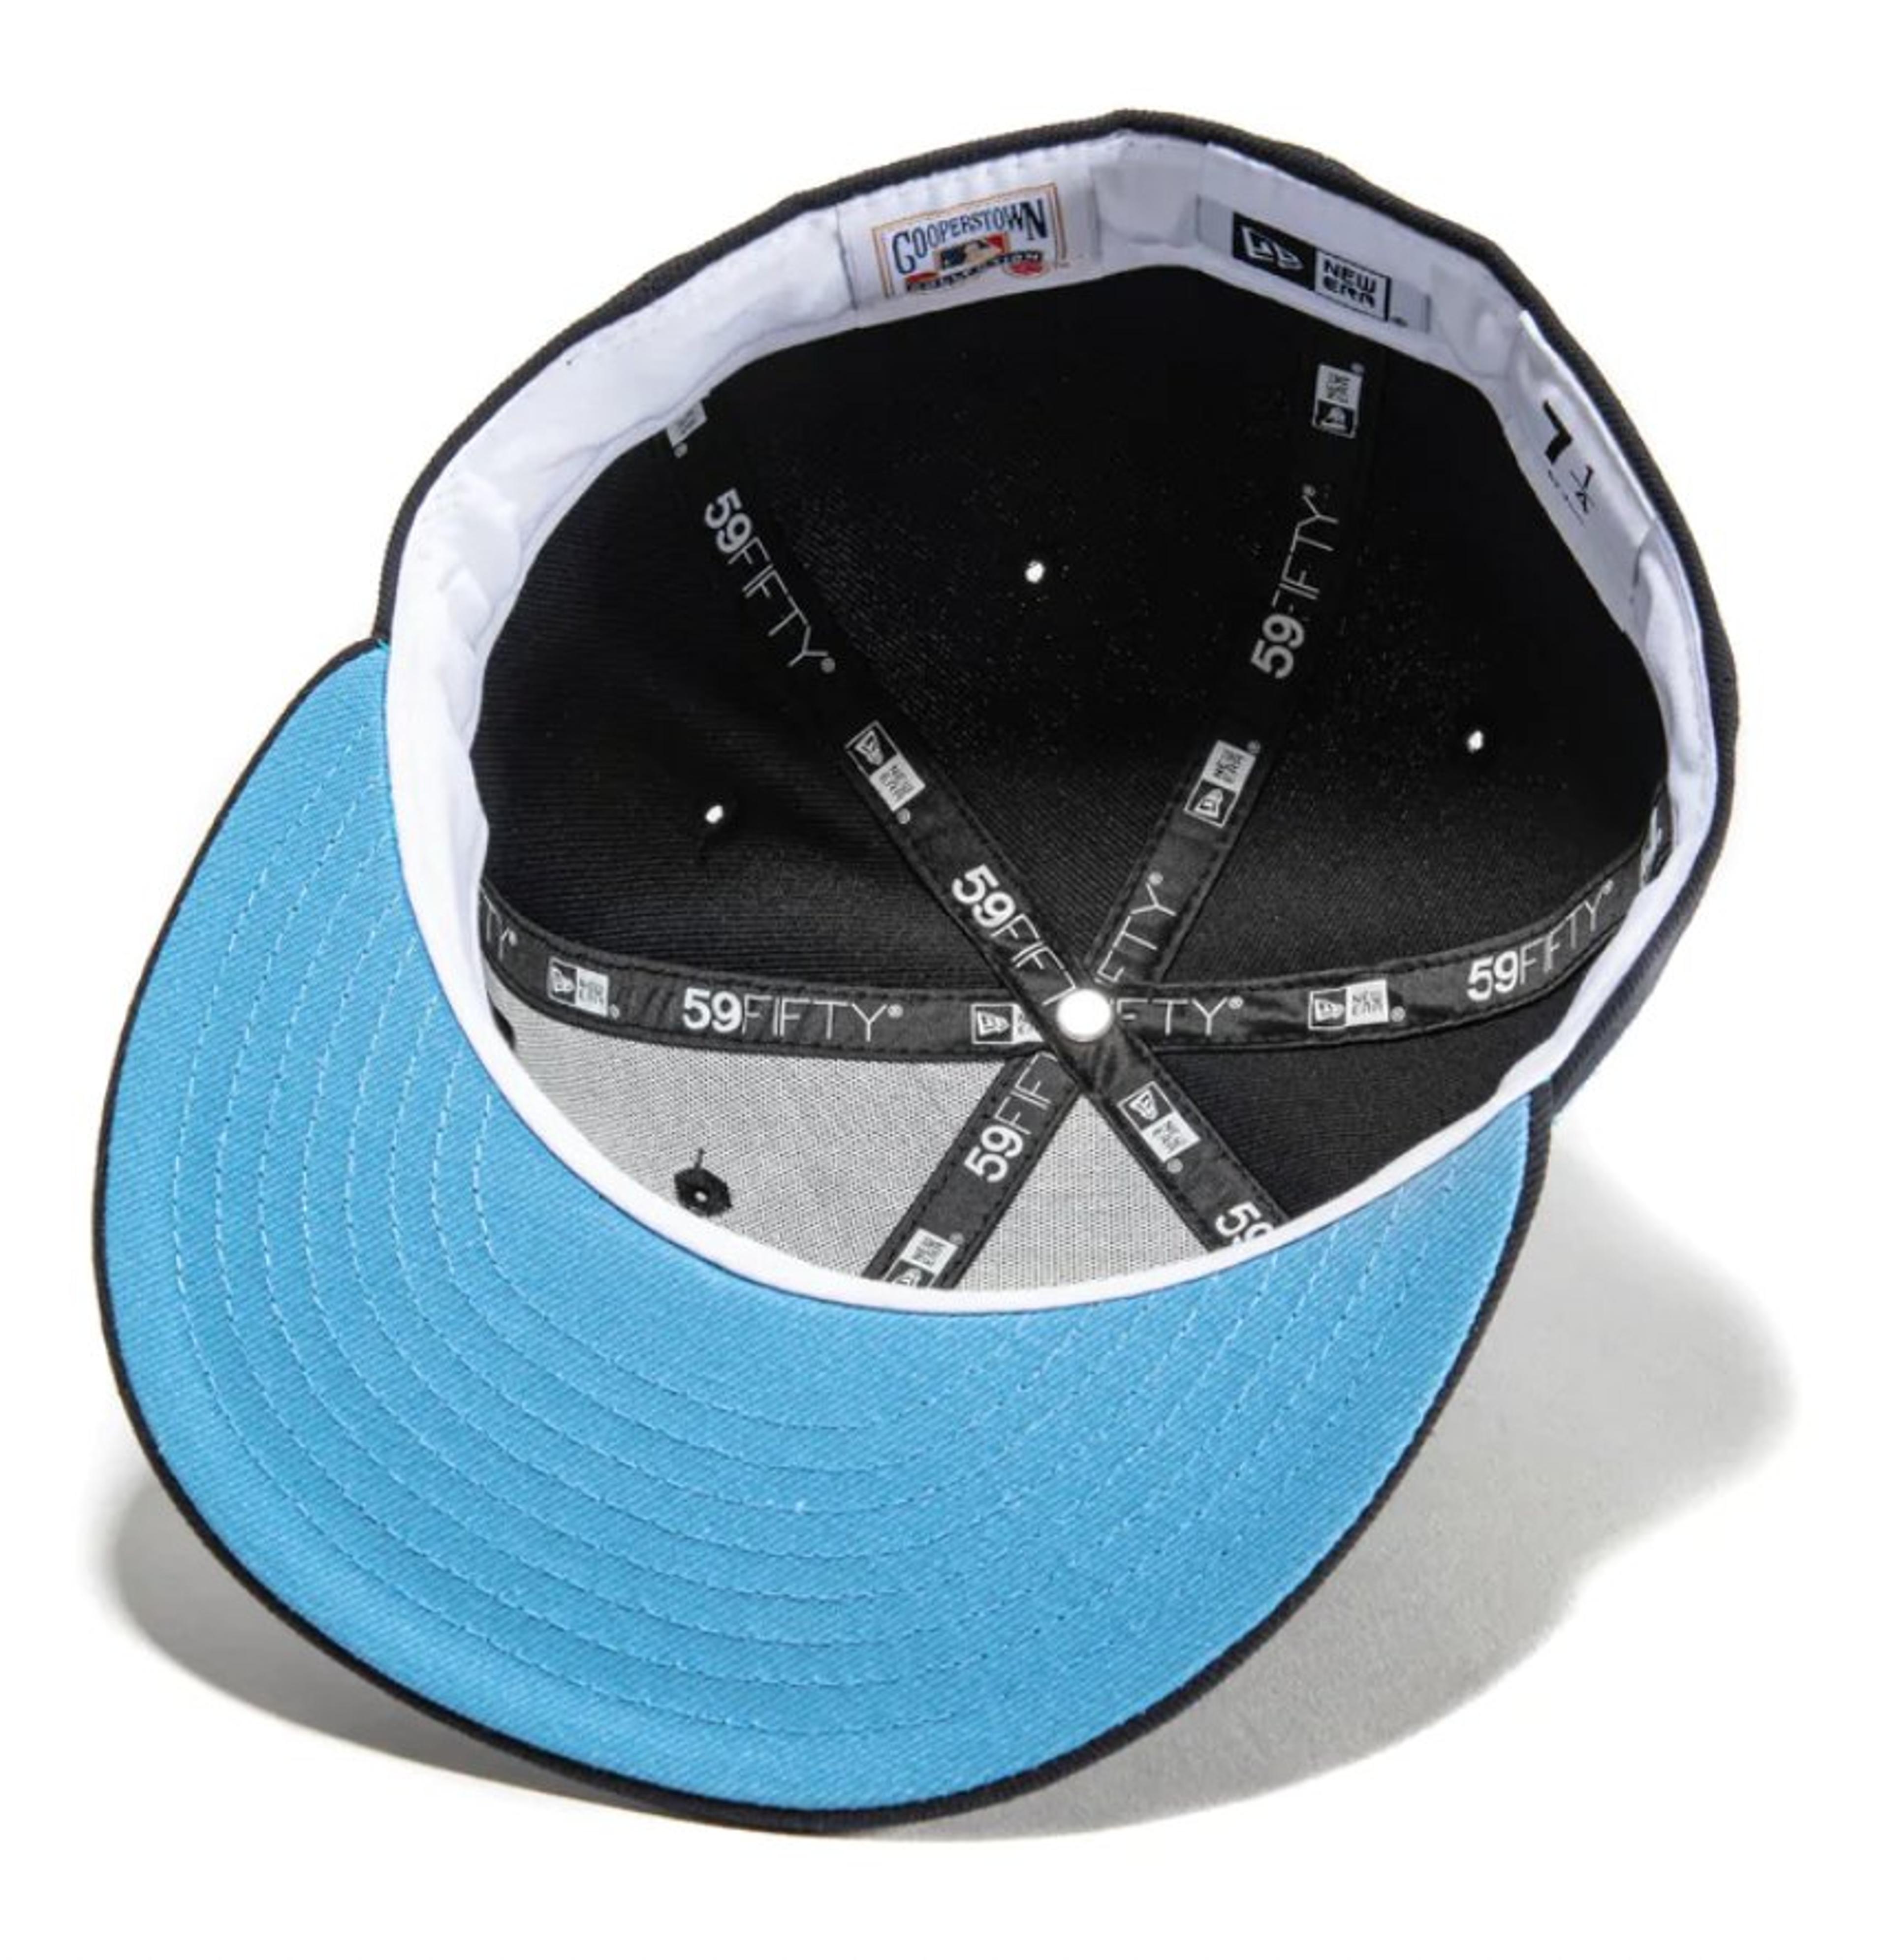 Tampa Bay Rays New Era 20th Anniversary 59FIFTY Fitted Hat - Light Blue